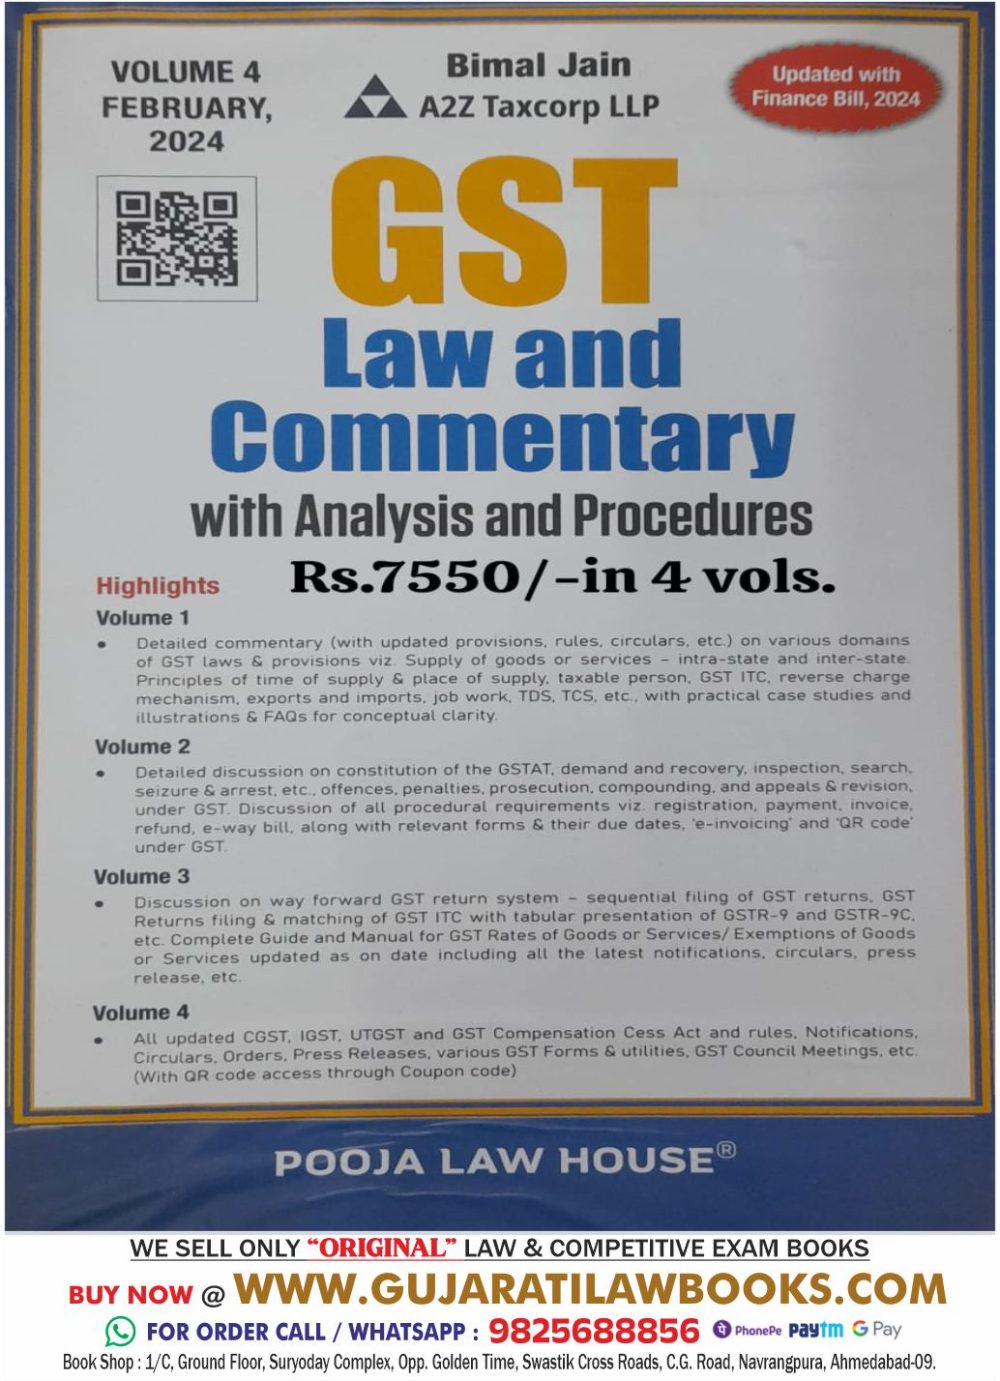 GST Law and Commentary With Analysis and Procedures (In 4 Volumes) by Bimal Jain - Latest February 2024 Pooja Law house